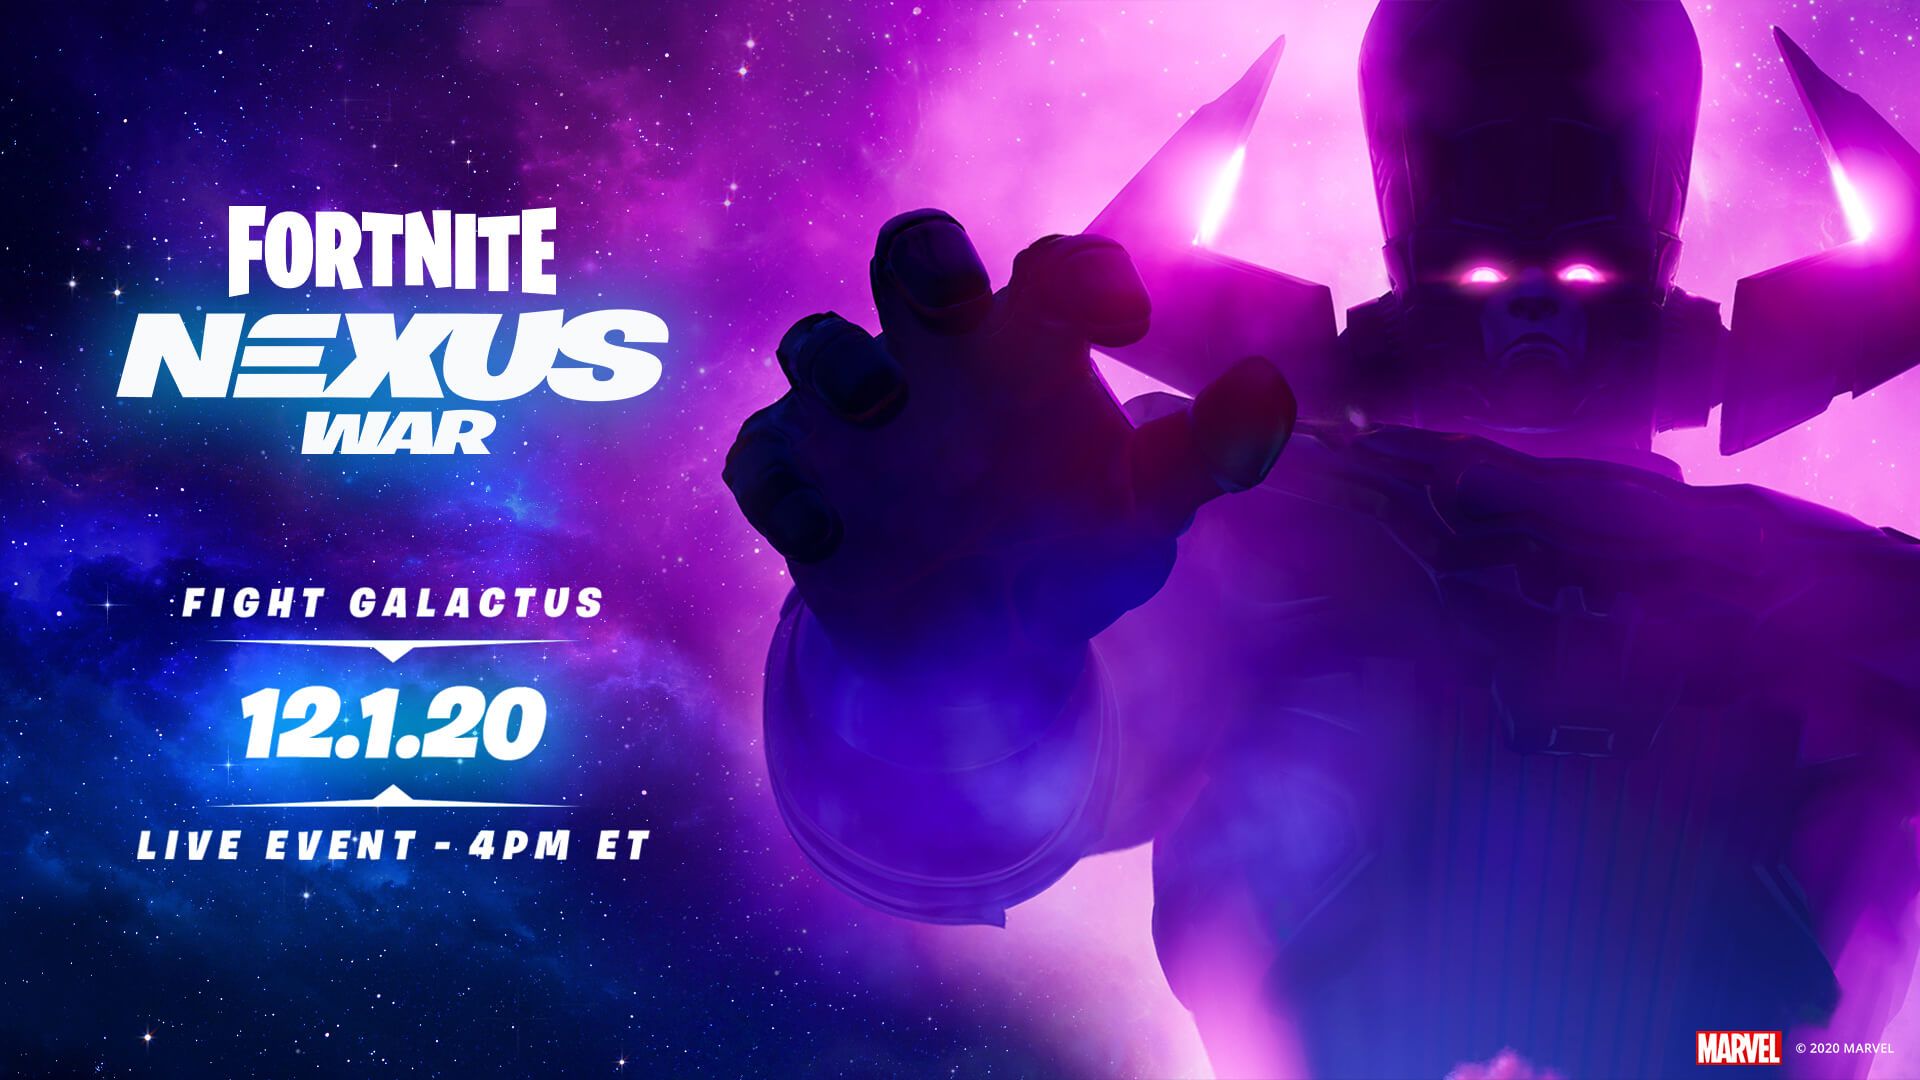 Galactus Arrives in Fortnite! Join the fight on December 1